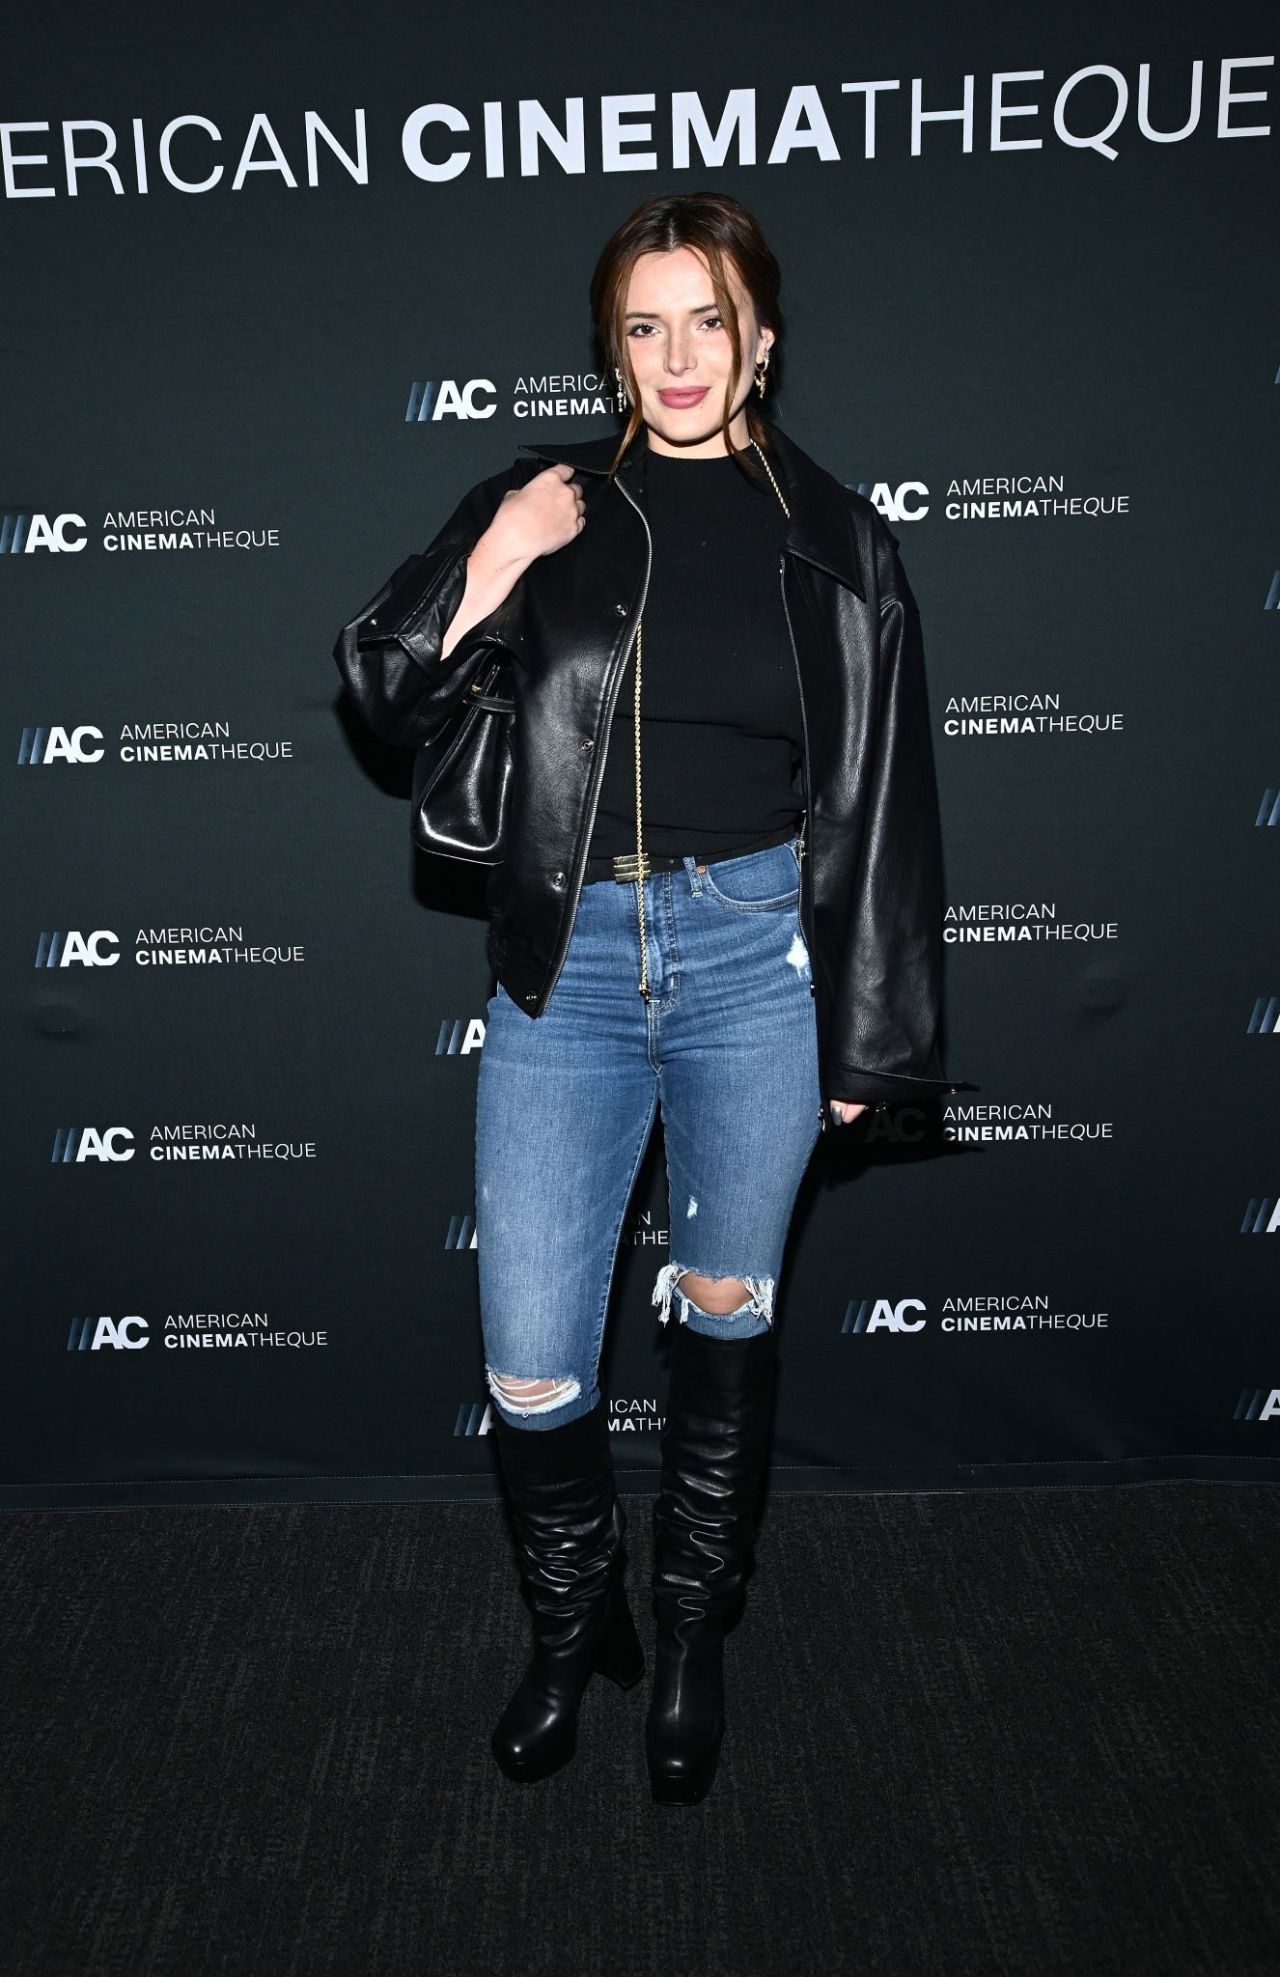 Bella Thorne Looking Great in Leather Jacket, Jeans and Boots